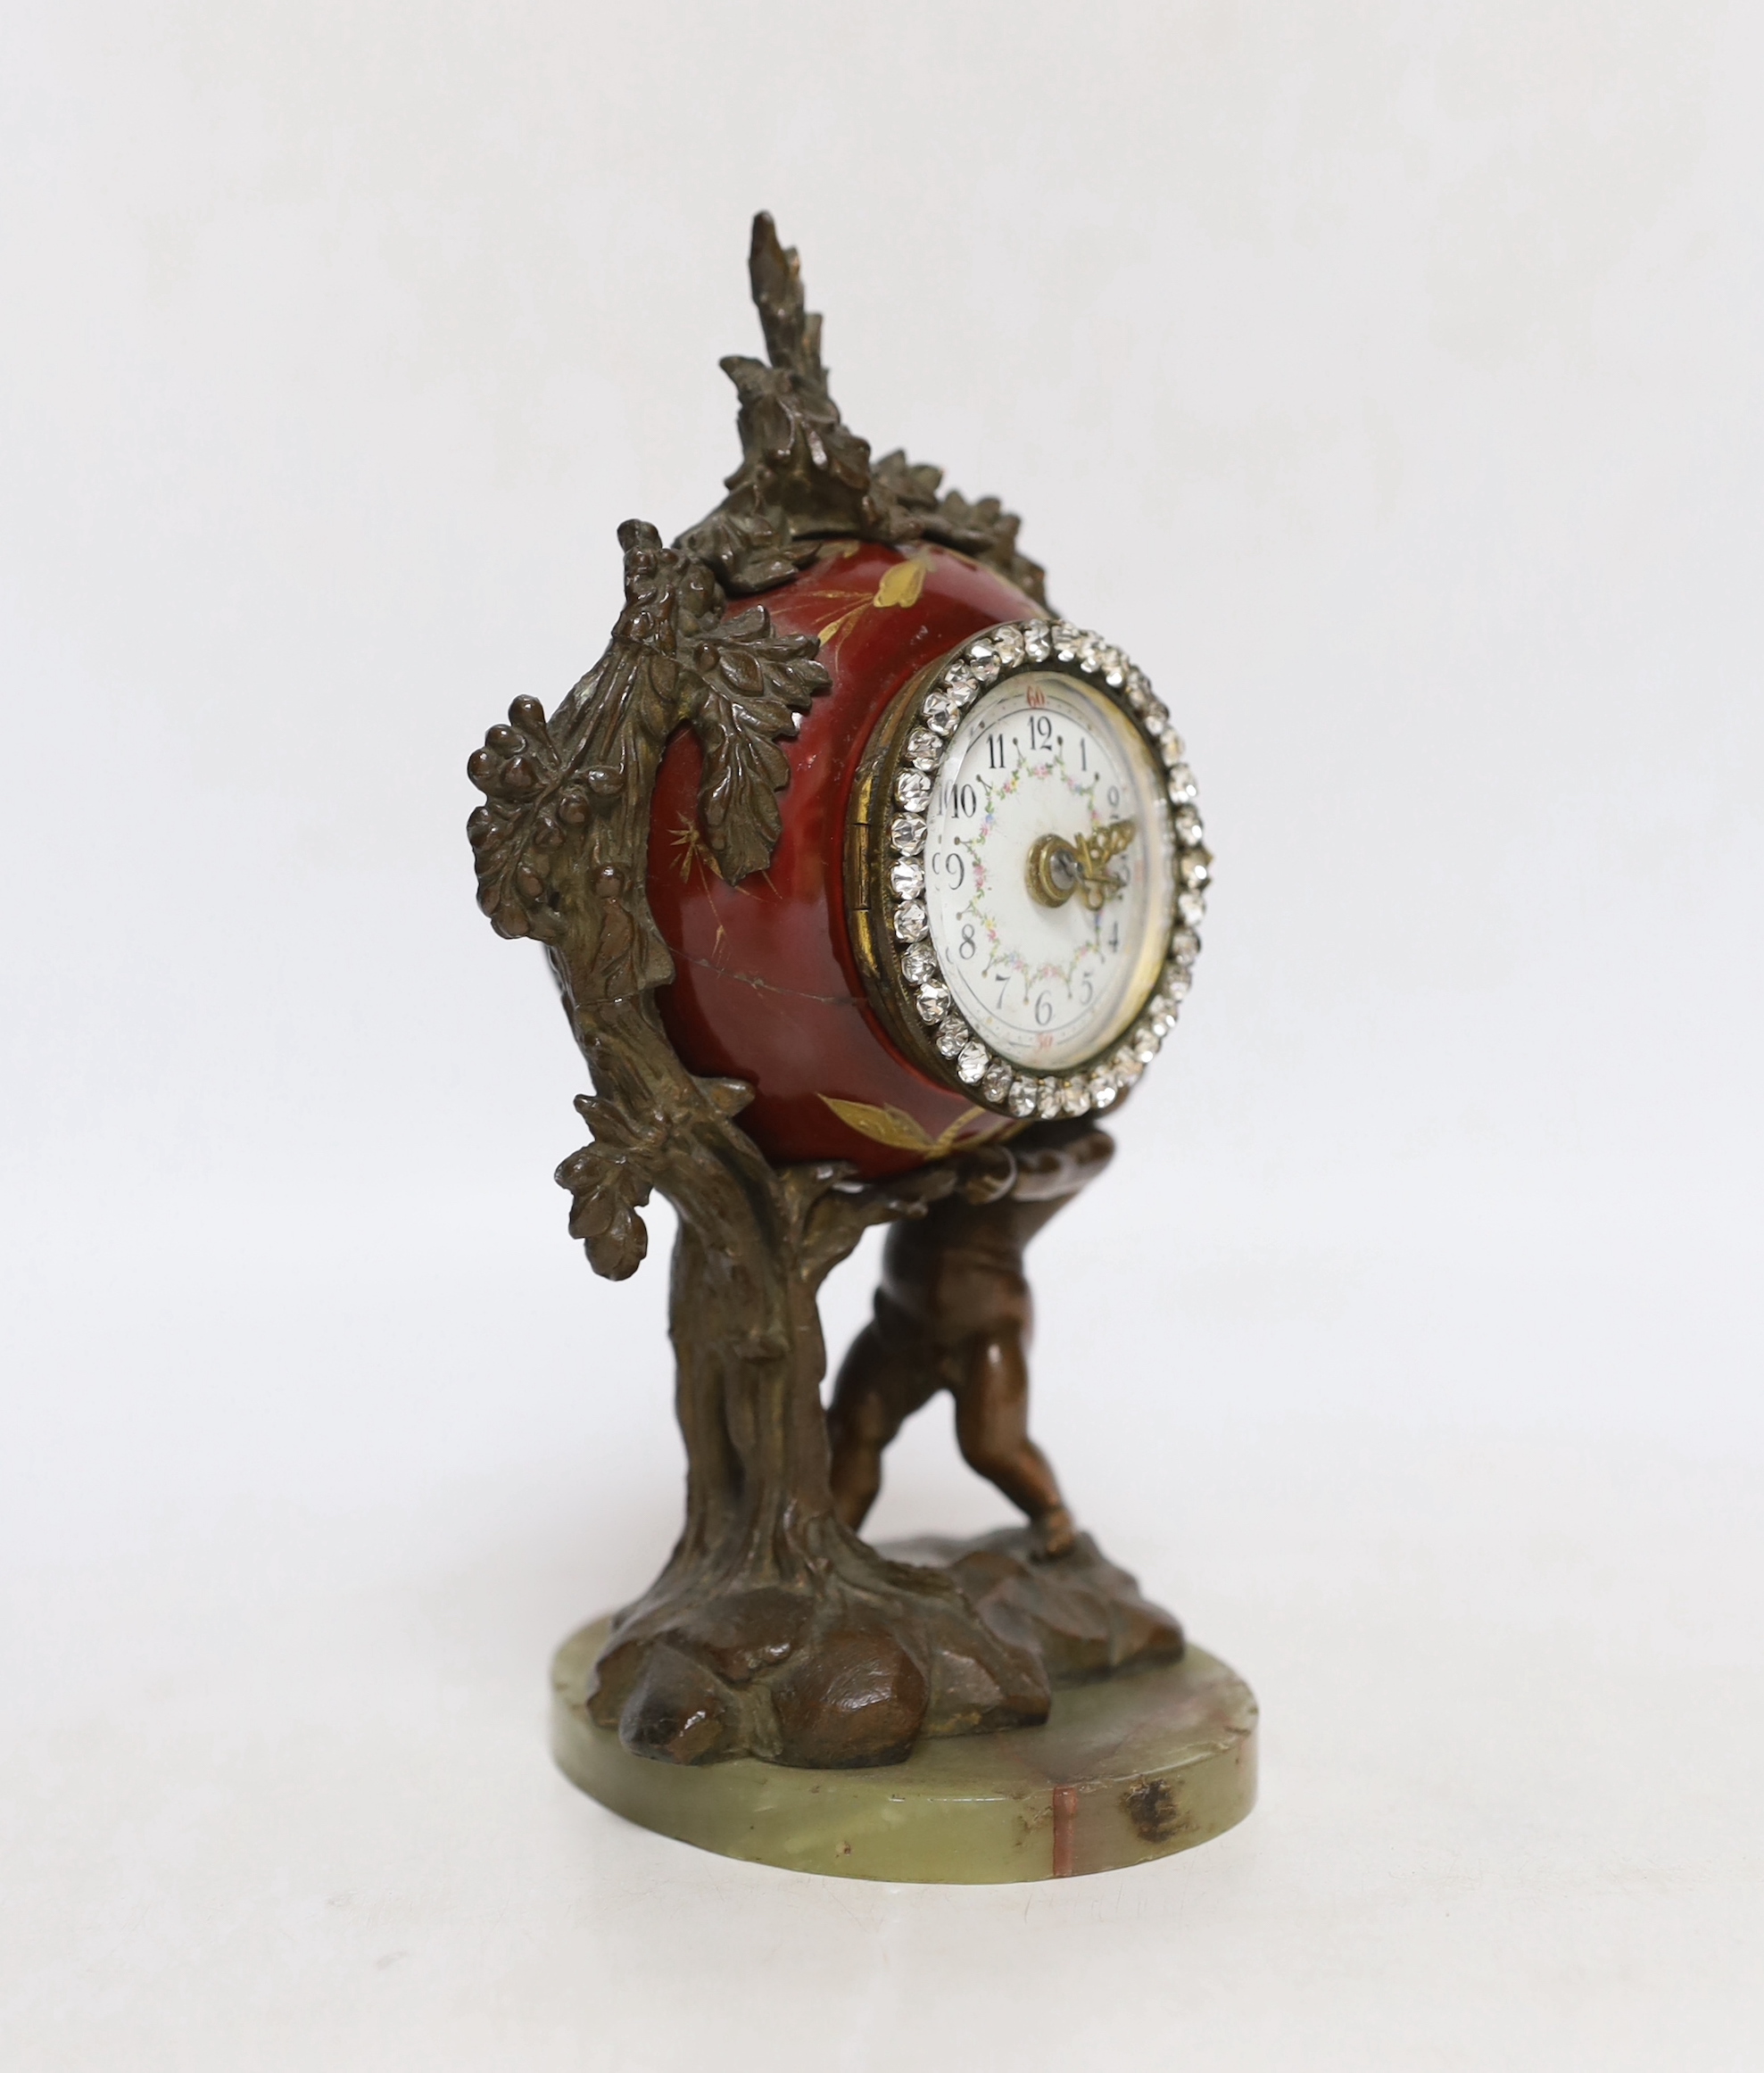 A late 19th century Louis XV style porcelain and gilt metal cased mantel clock, 18.5cm high